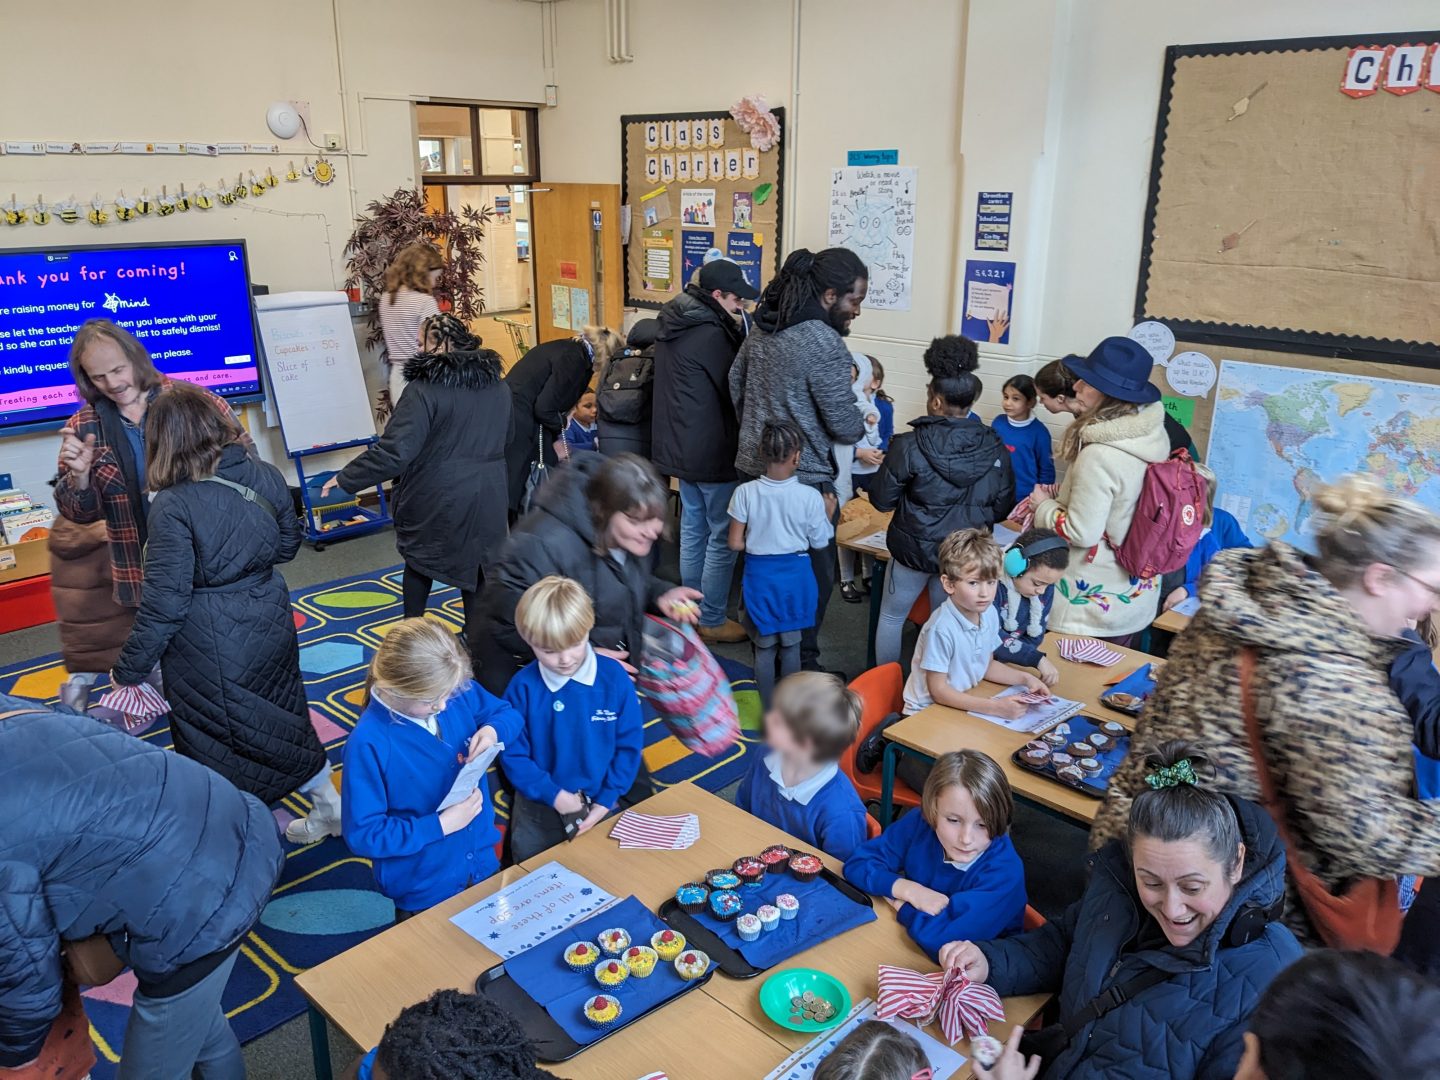 Parents and children buying and selling cakes in a classroom.